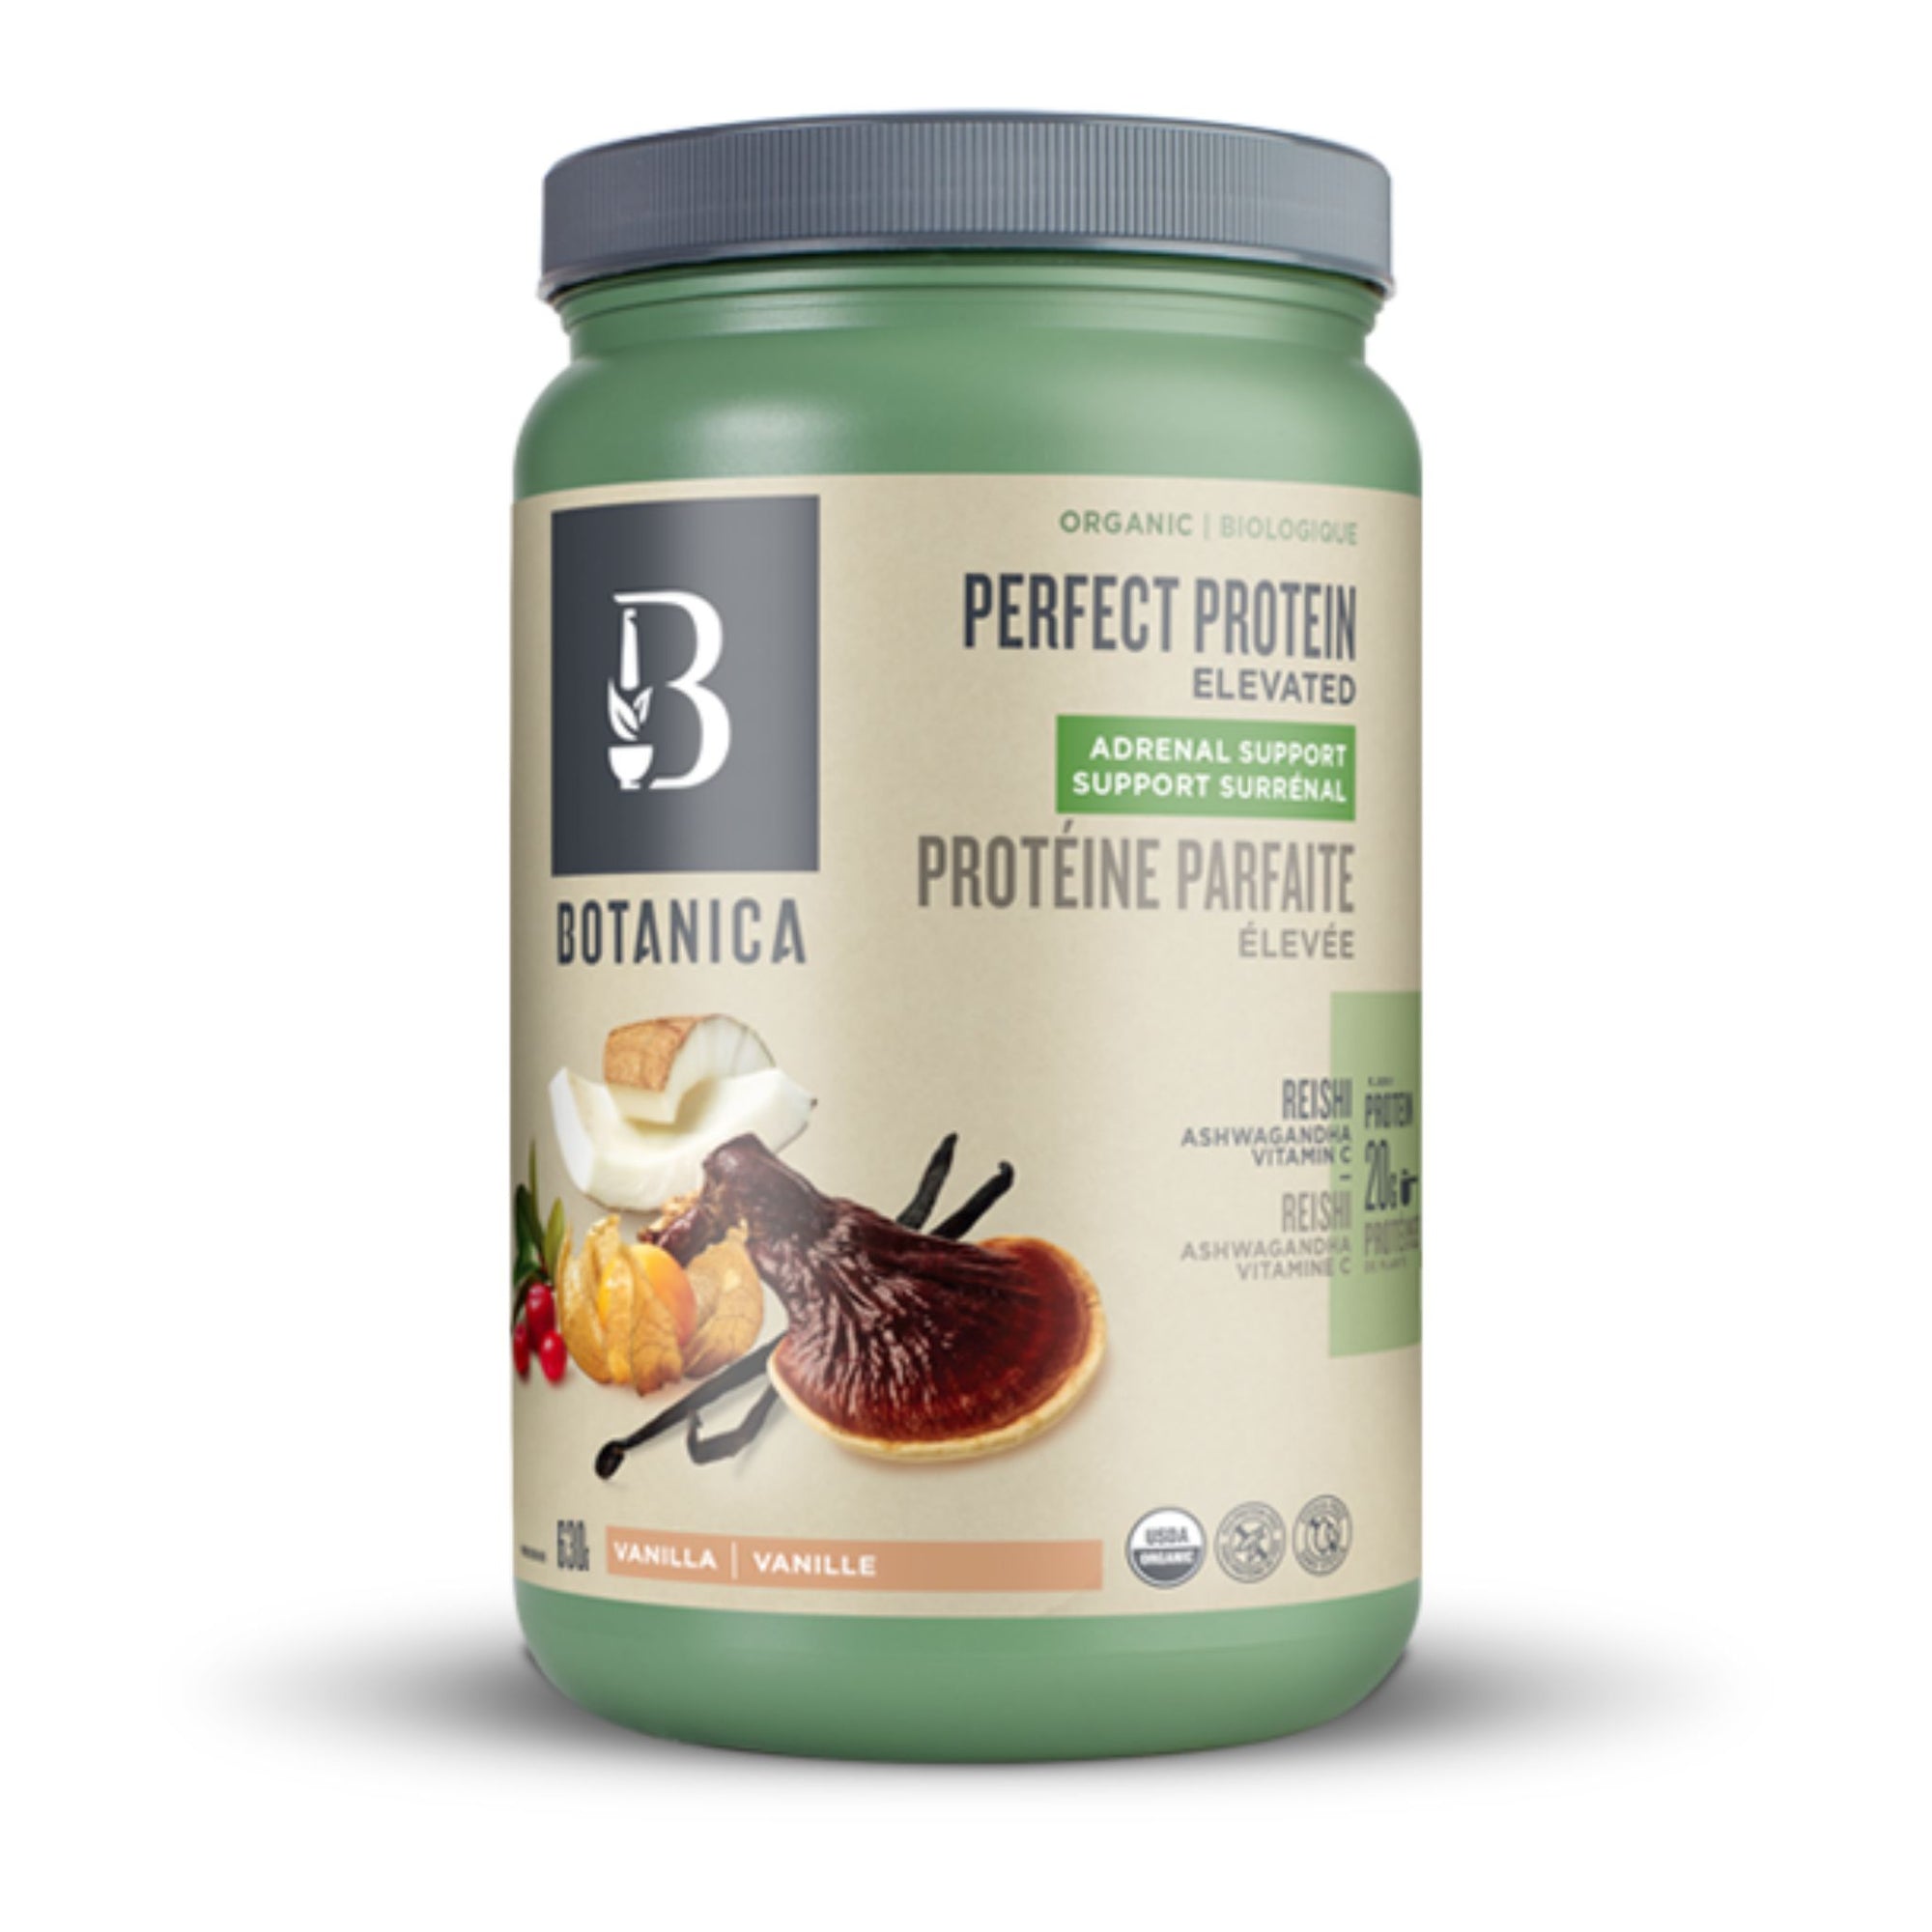 Bottle of Botanica Perfect Protein Elevated Adrenal Support 642g - Vanilla flavour with Reishi, ashwagandha, and vitamin C.